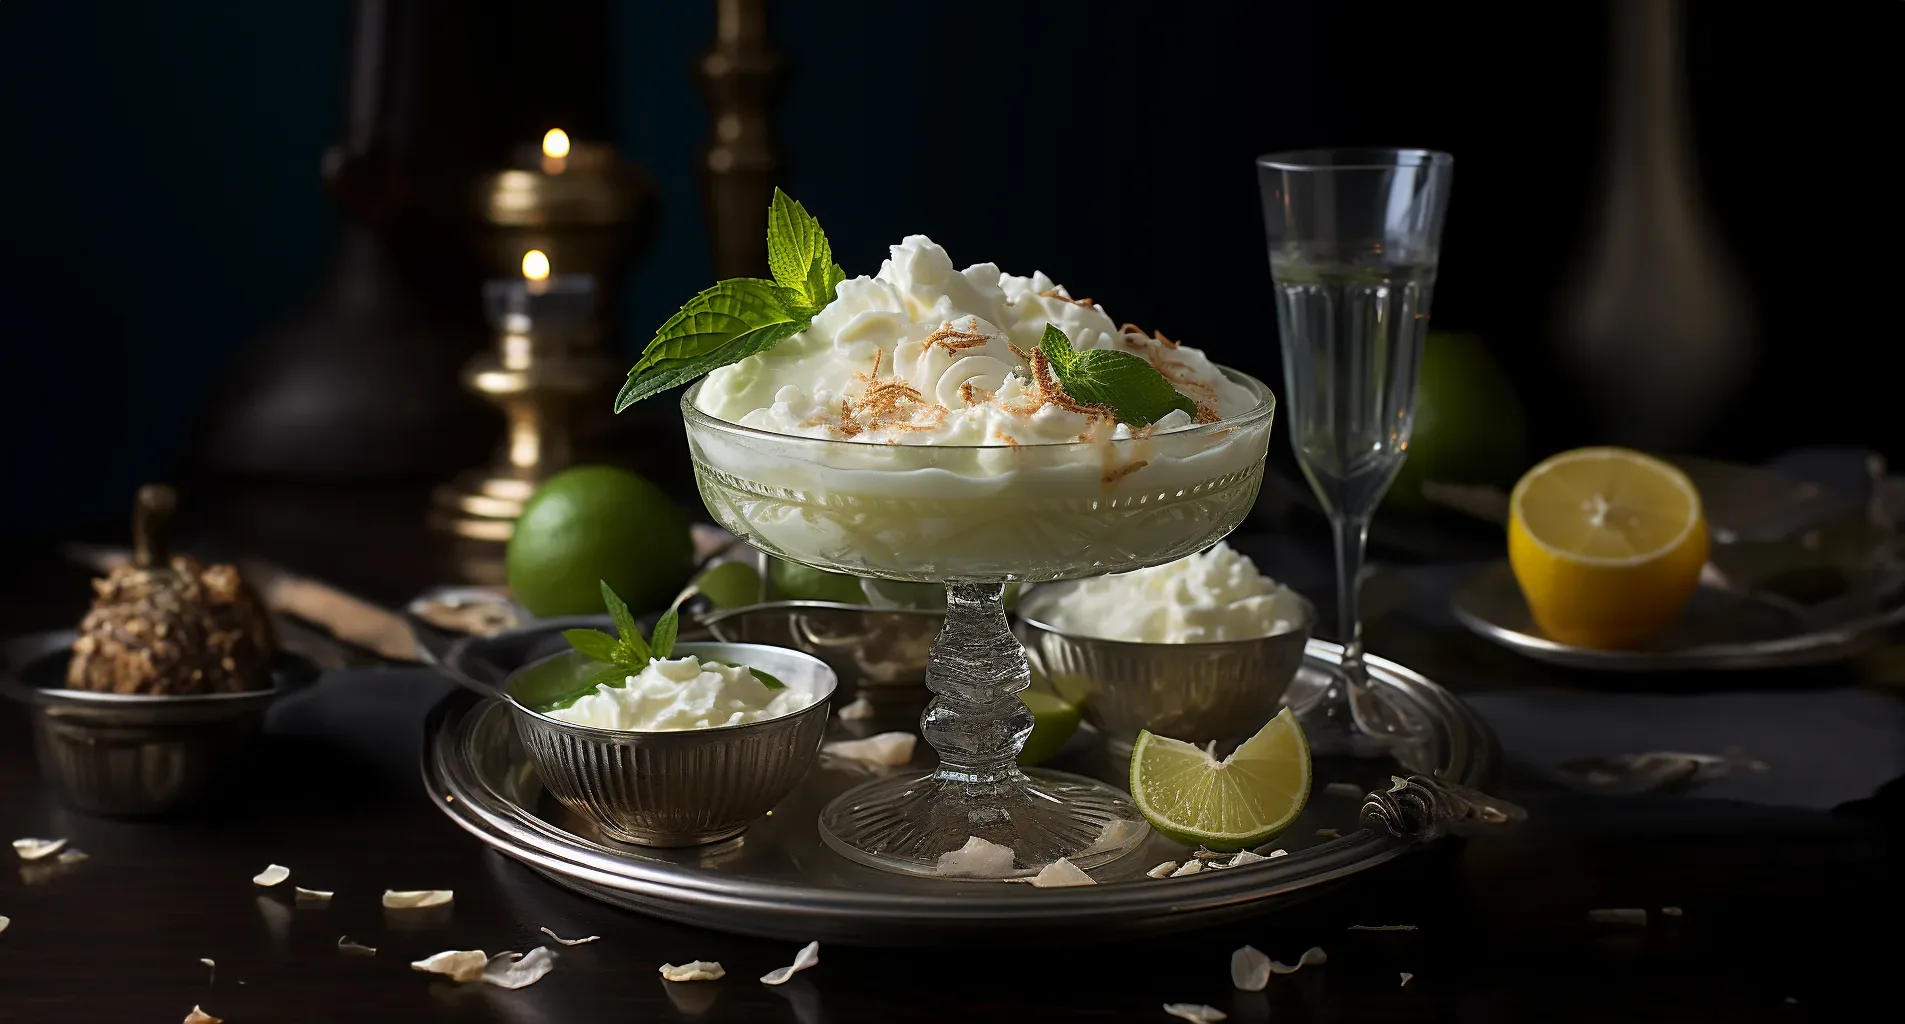 A dessert with whipped cream and lime on a silver plate. Food ideas for your wedding